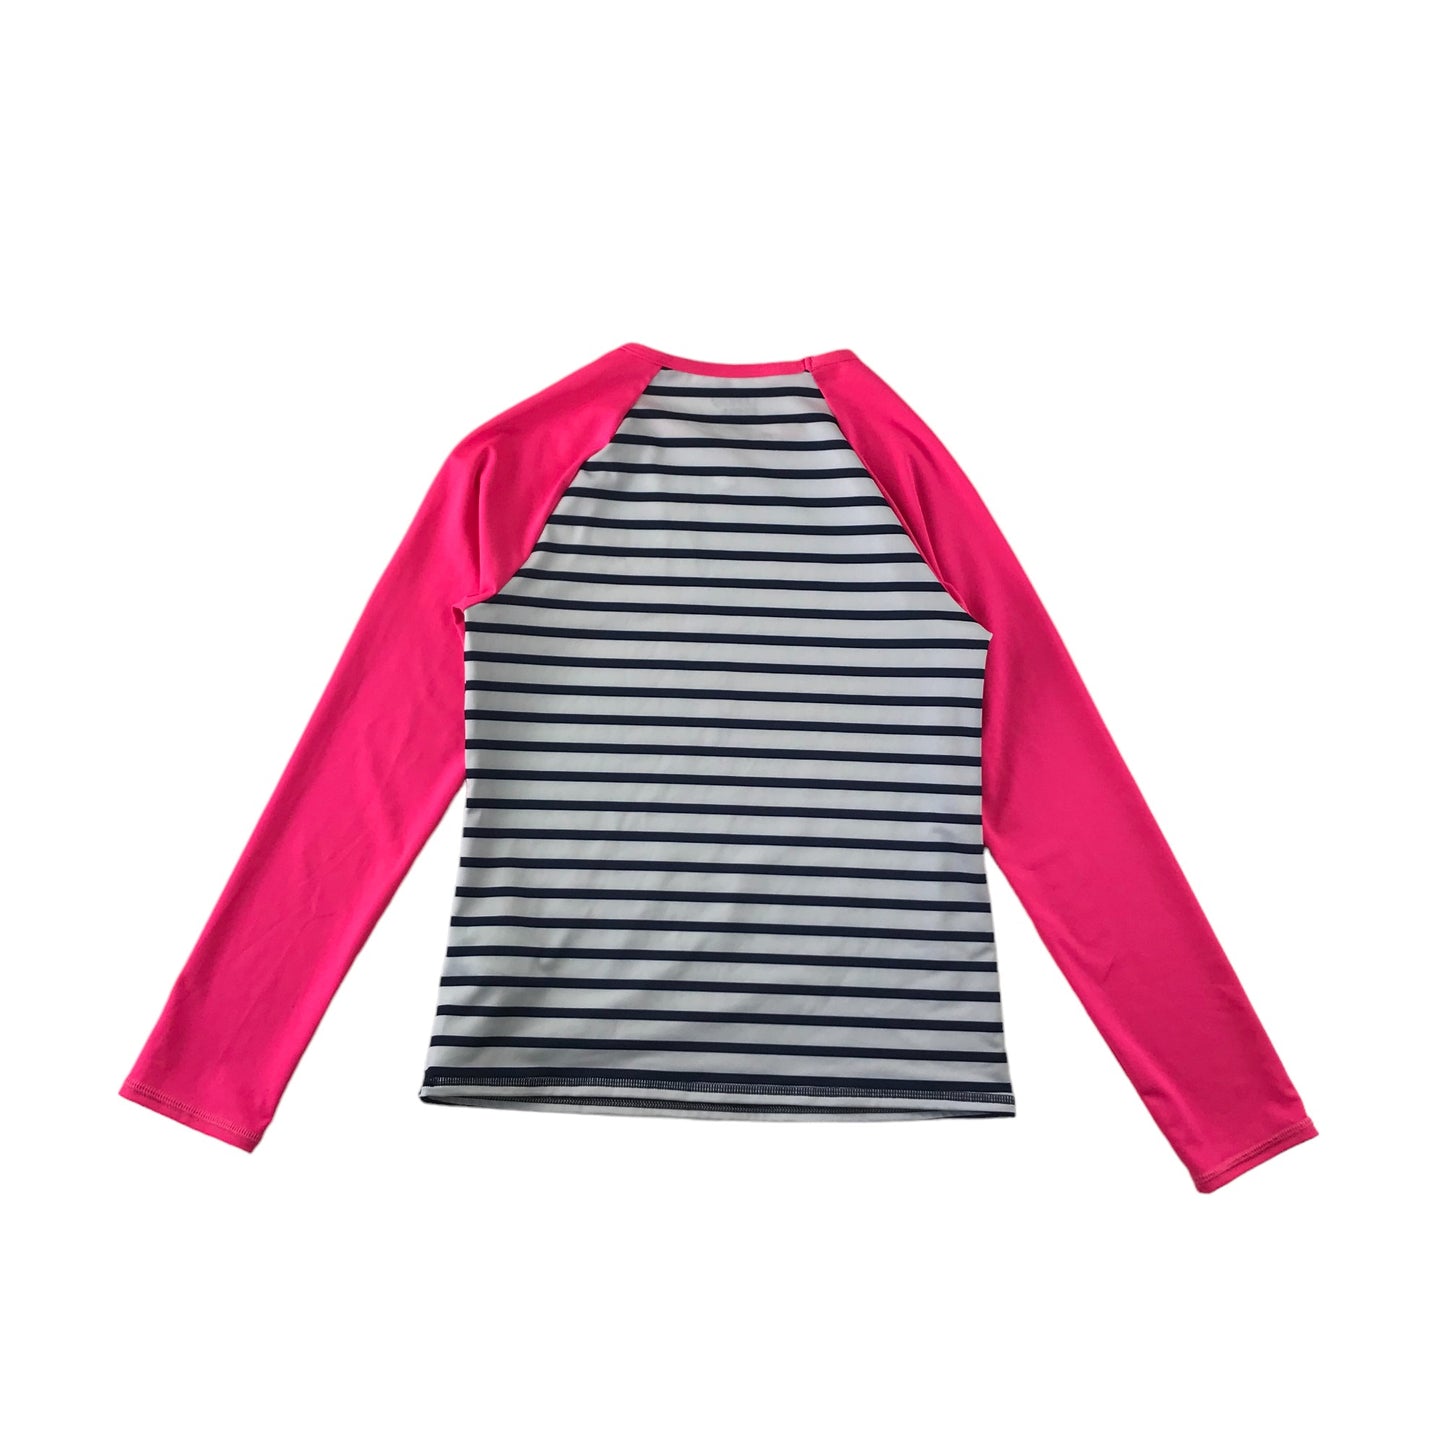 Lands End Swim Top Age 10 Pink Long Sleeve Navy and White Stripy